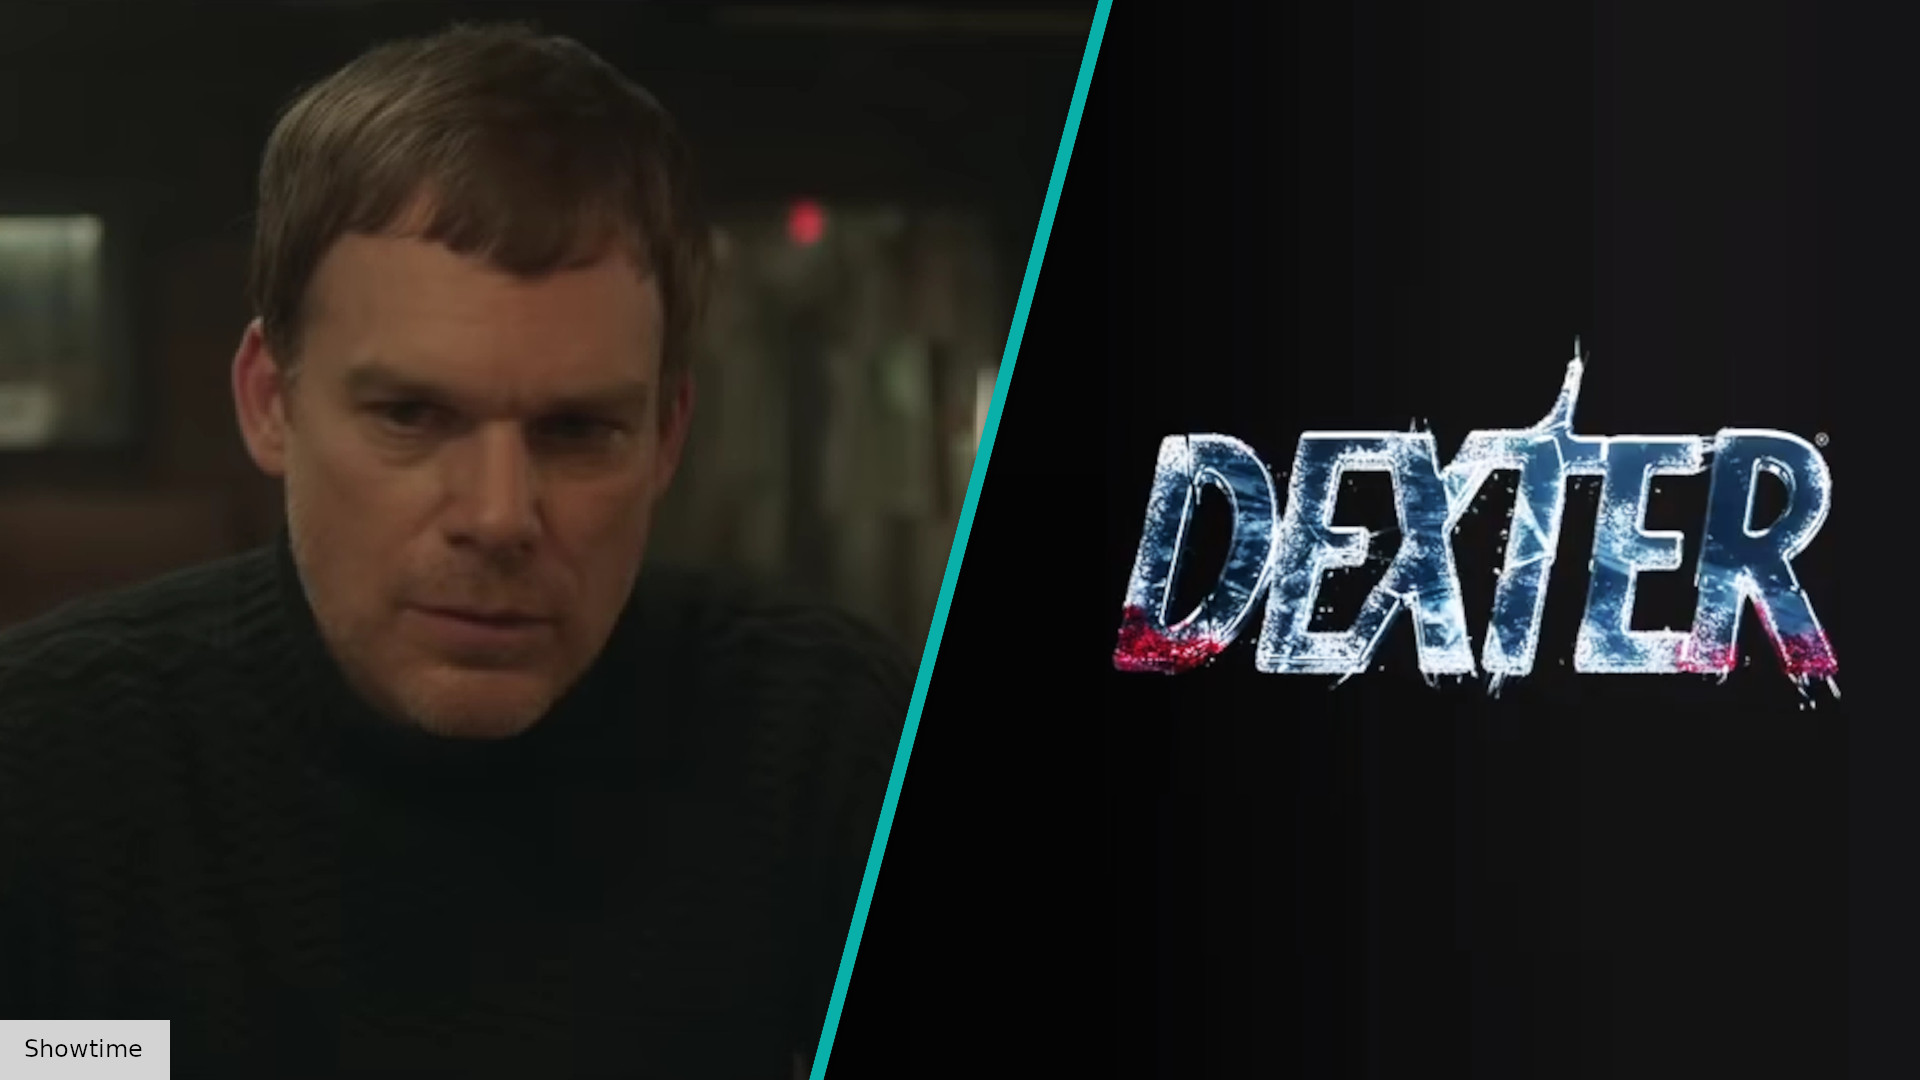 New Blood – where can you stream Dexter season 9?